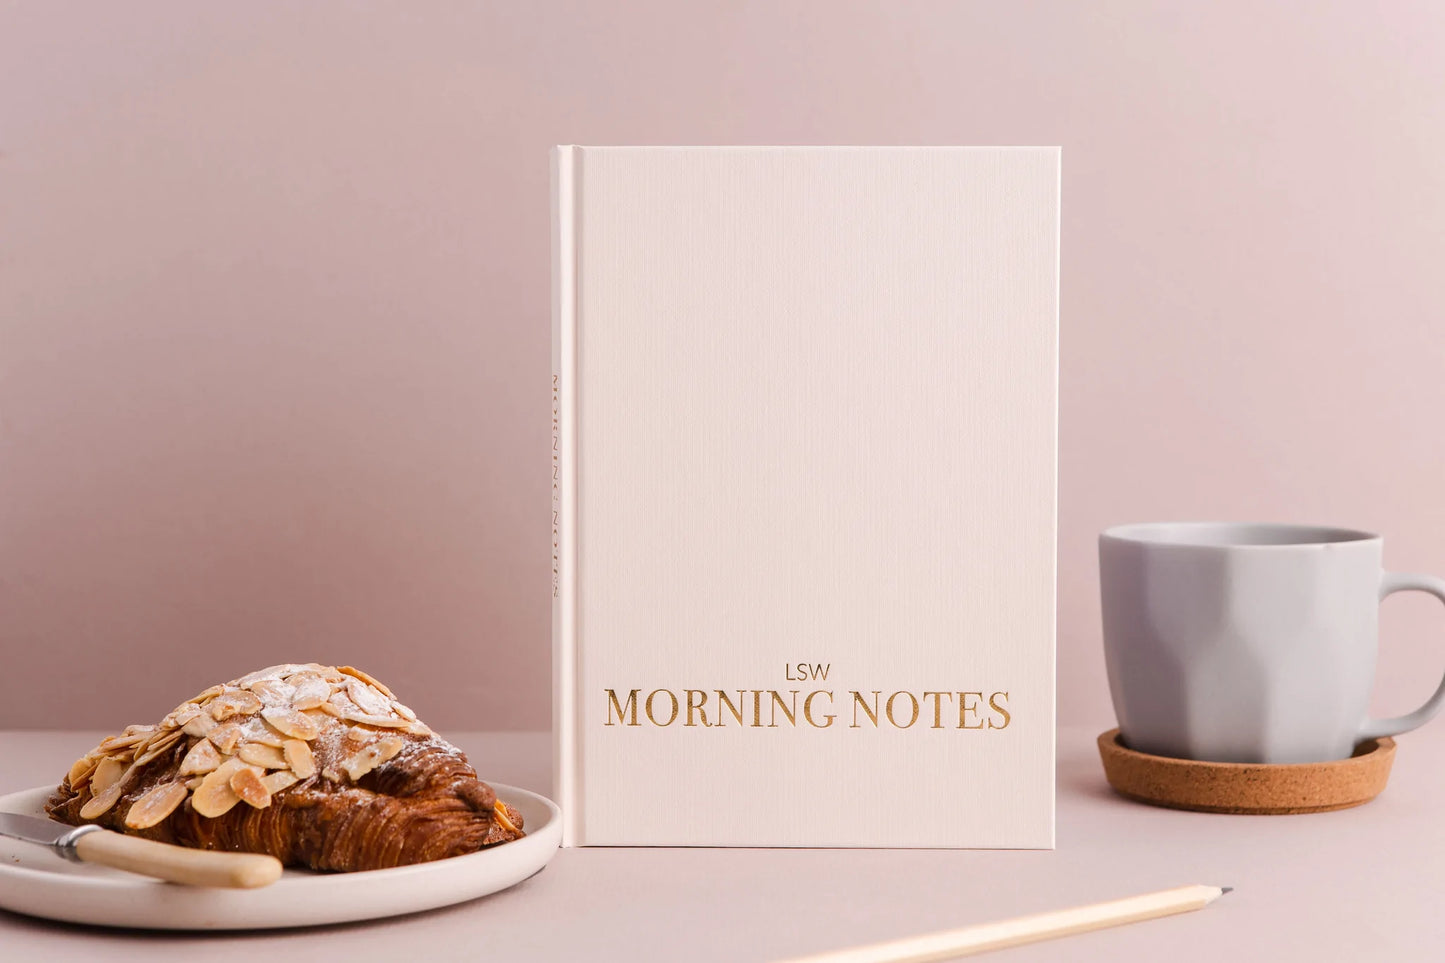 LSW Morning Notes by LSW London